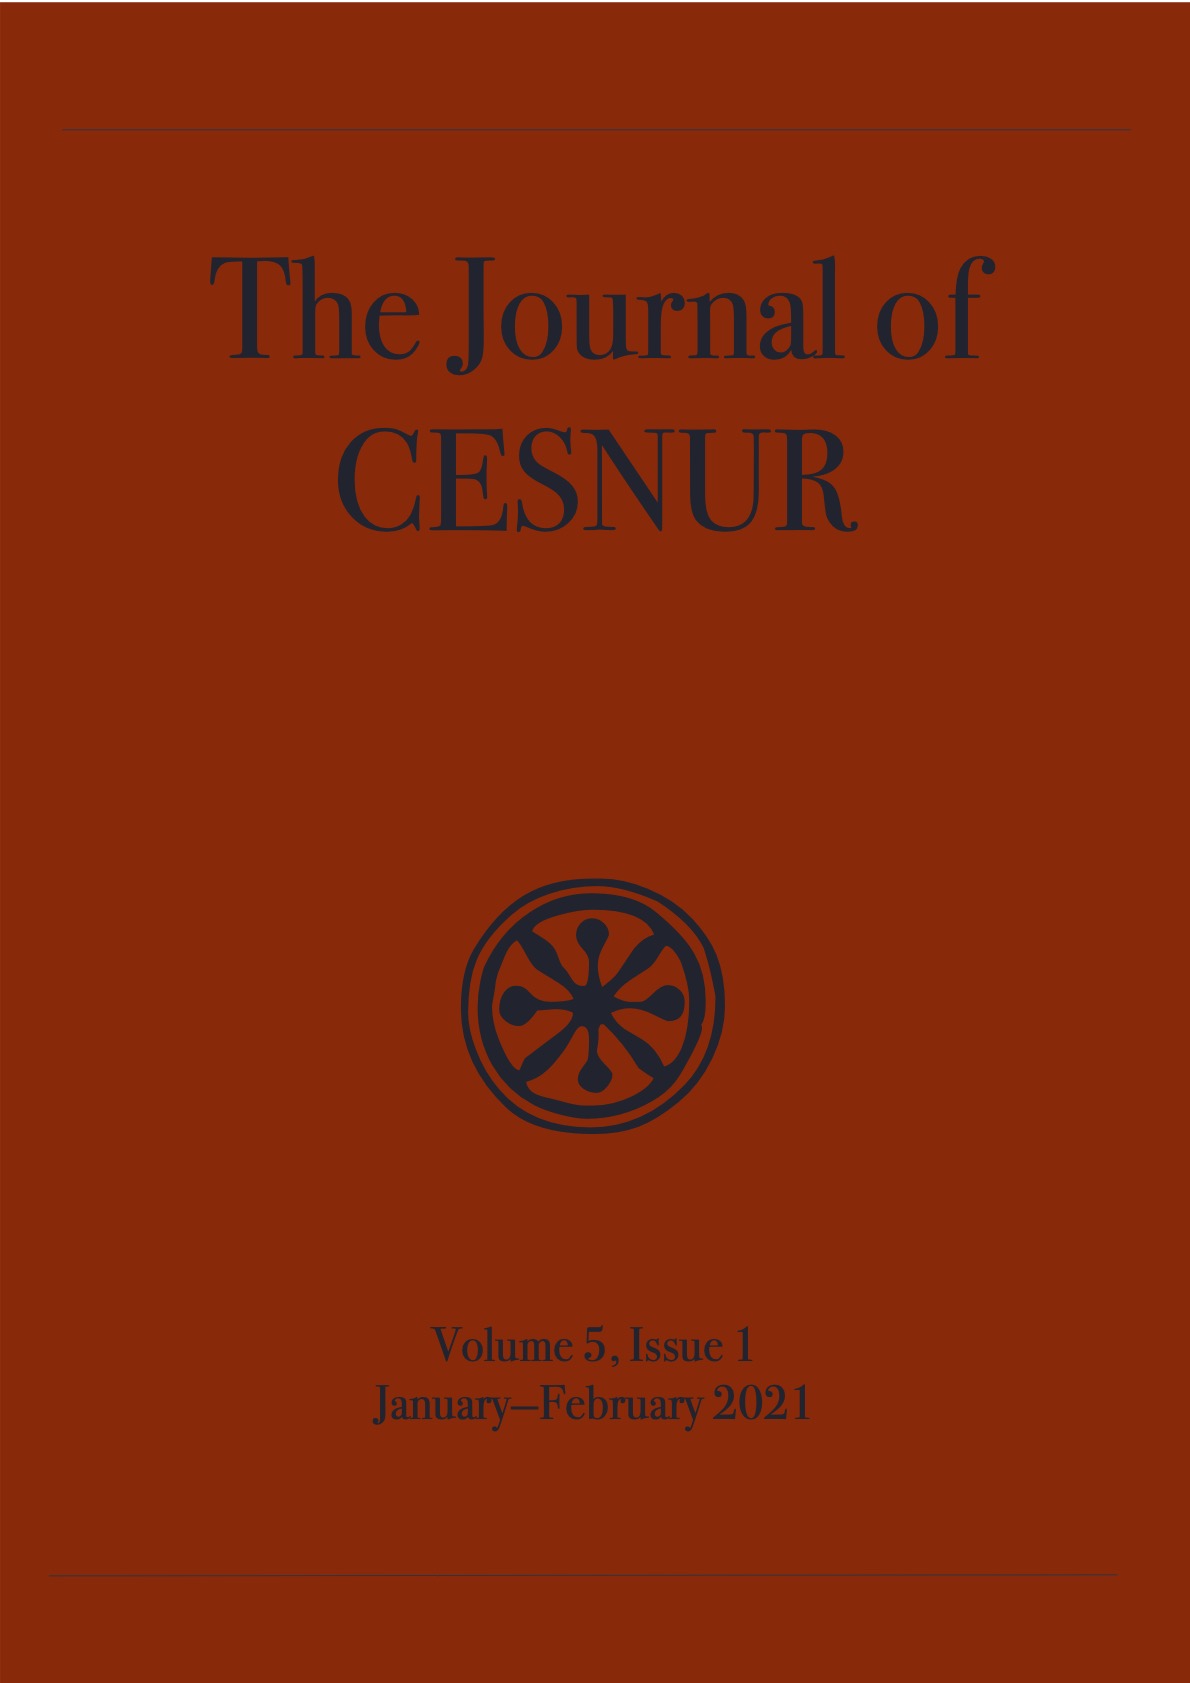 The Journal of CESNUR, volume 4, issue 5